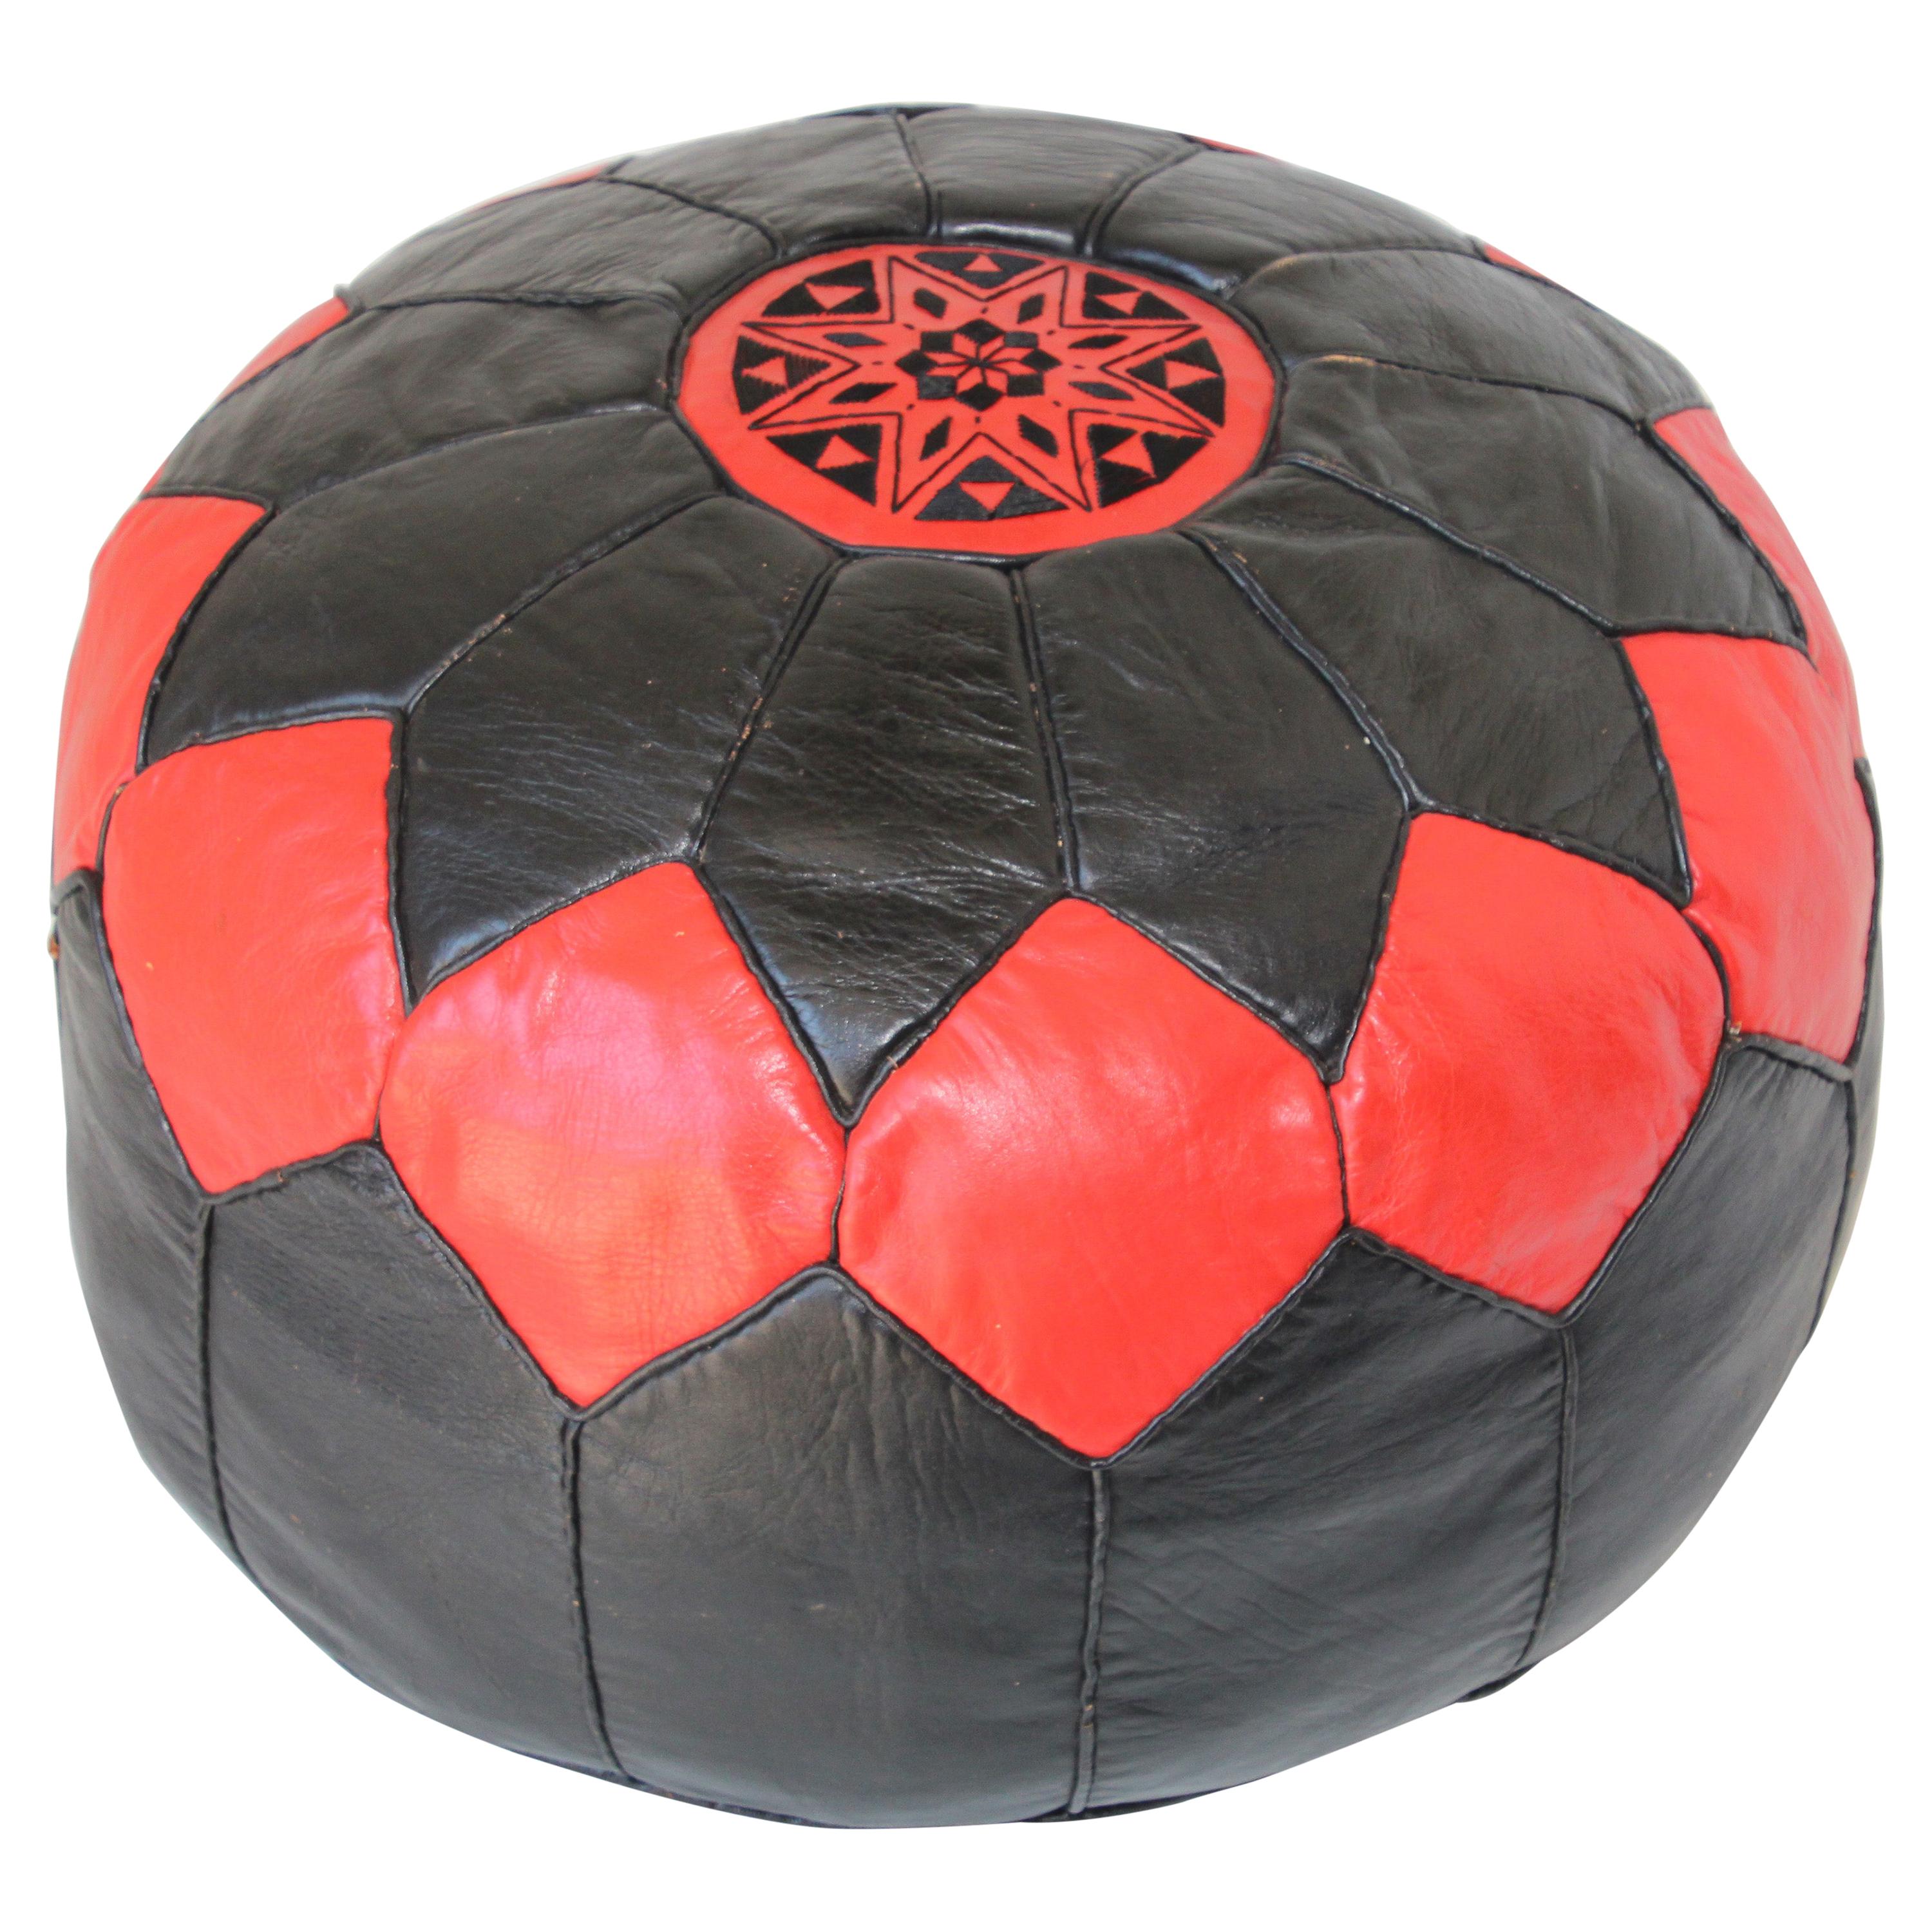 Vintage Moroccan Leather Pouf Hand-Tooled in Marrakesh Red and Black